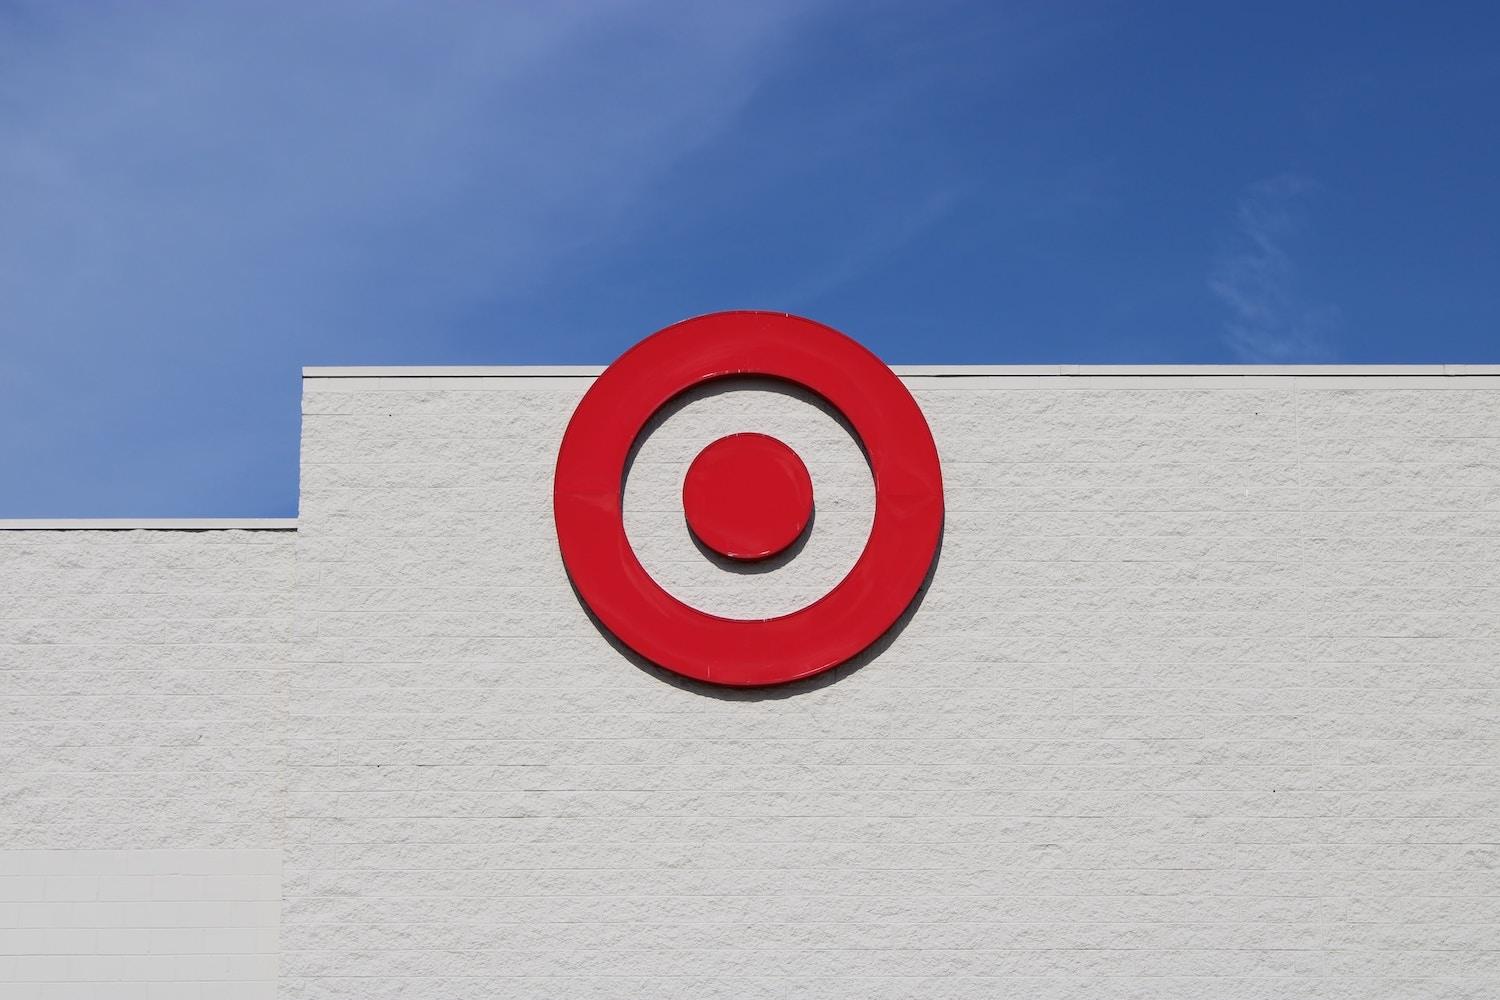 target store logo against blue sky - target has a chance to change the narrative on LGBTQ rights